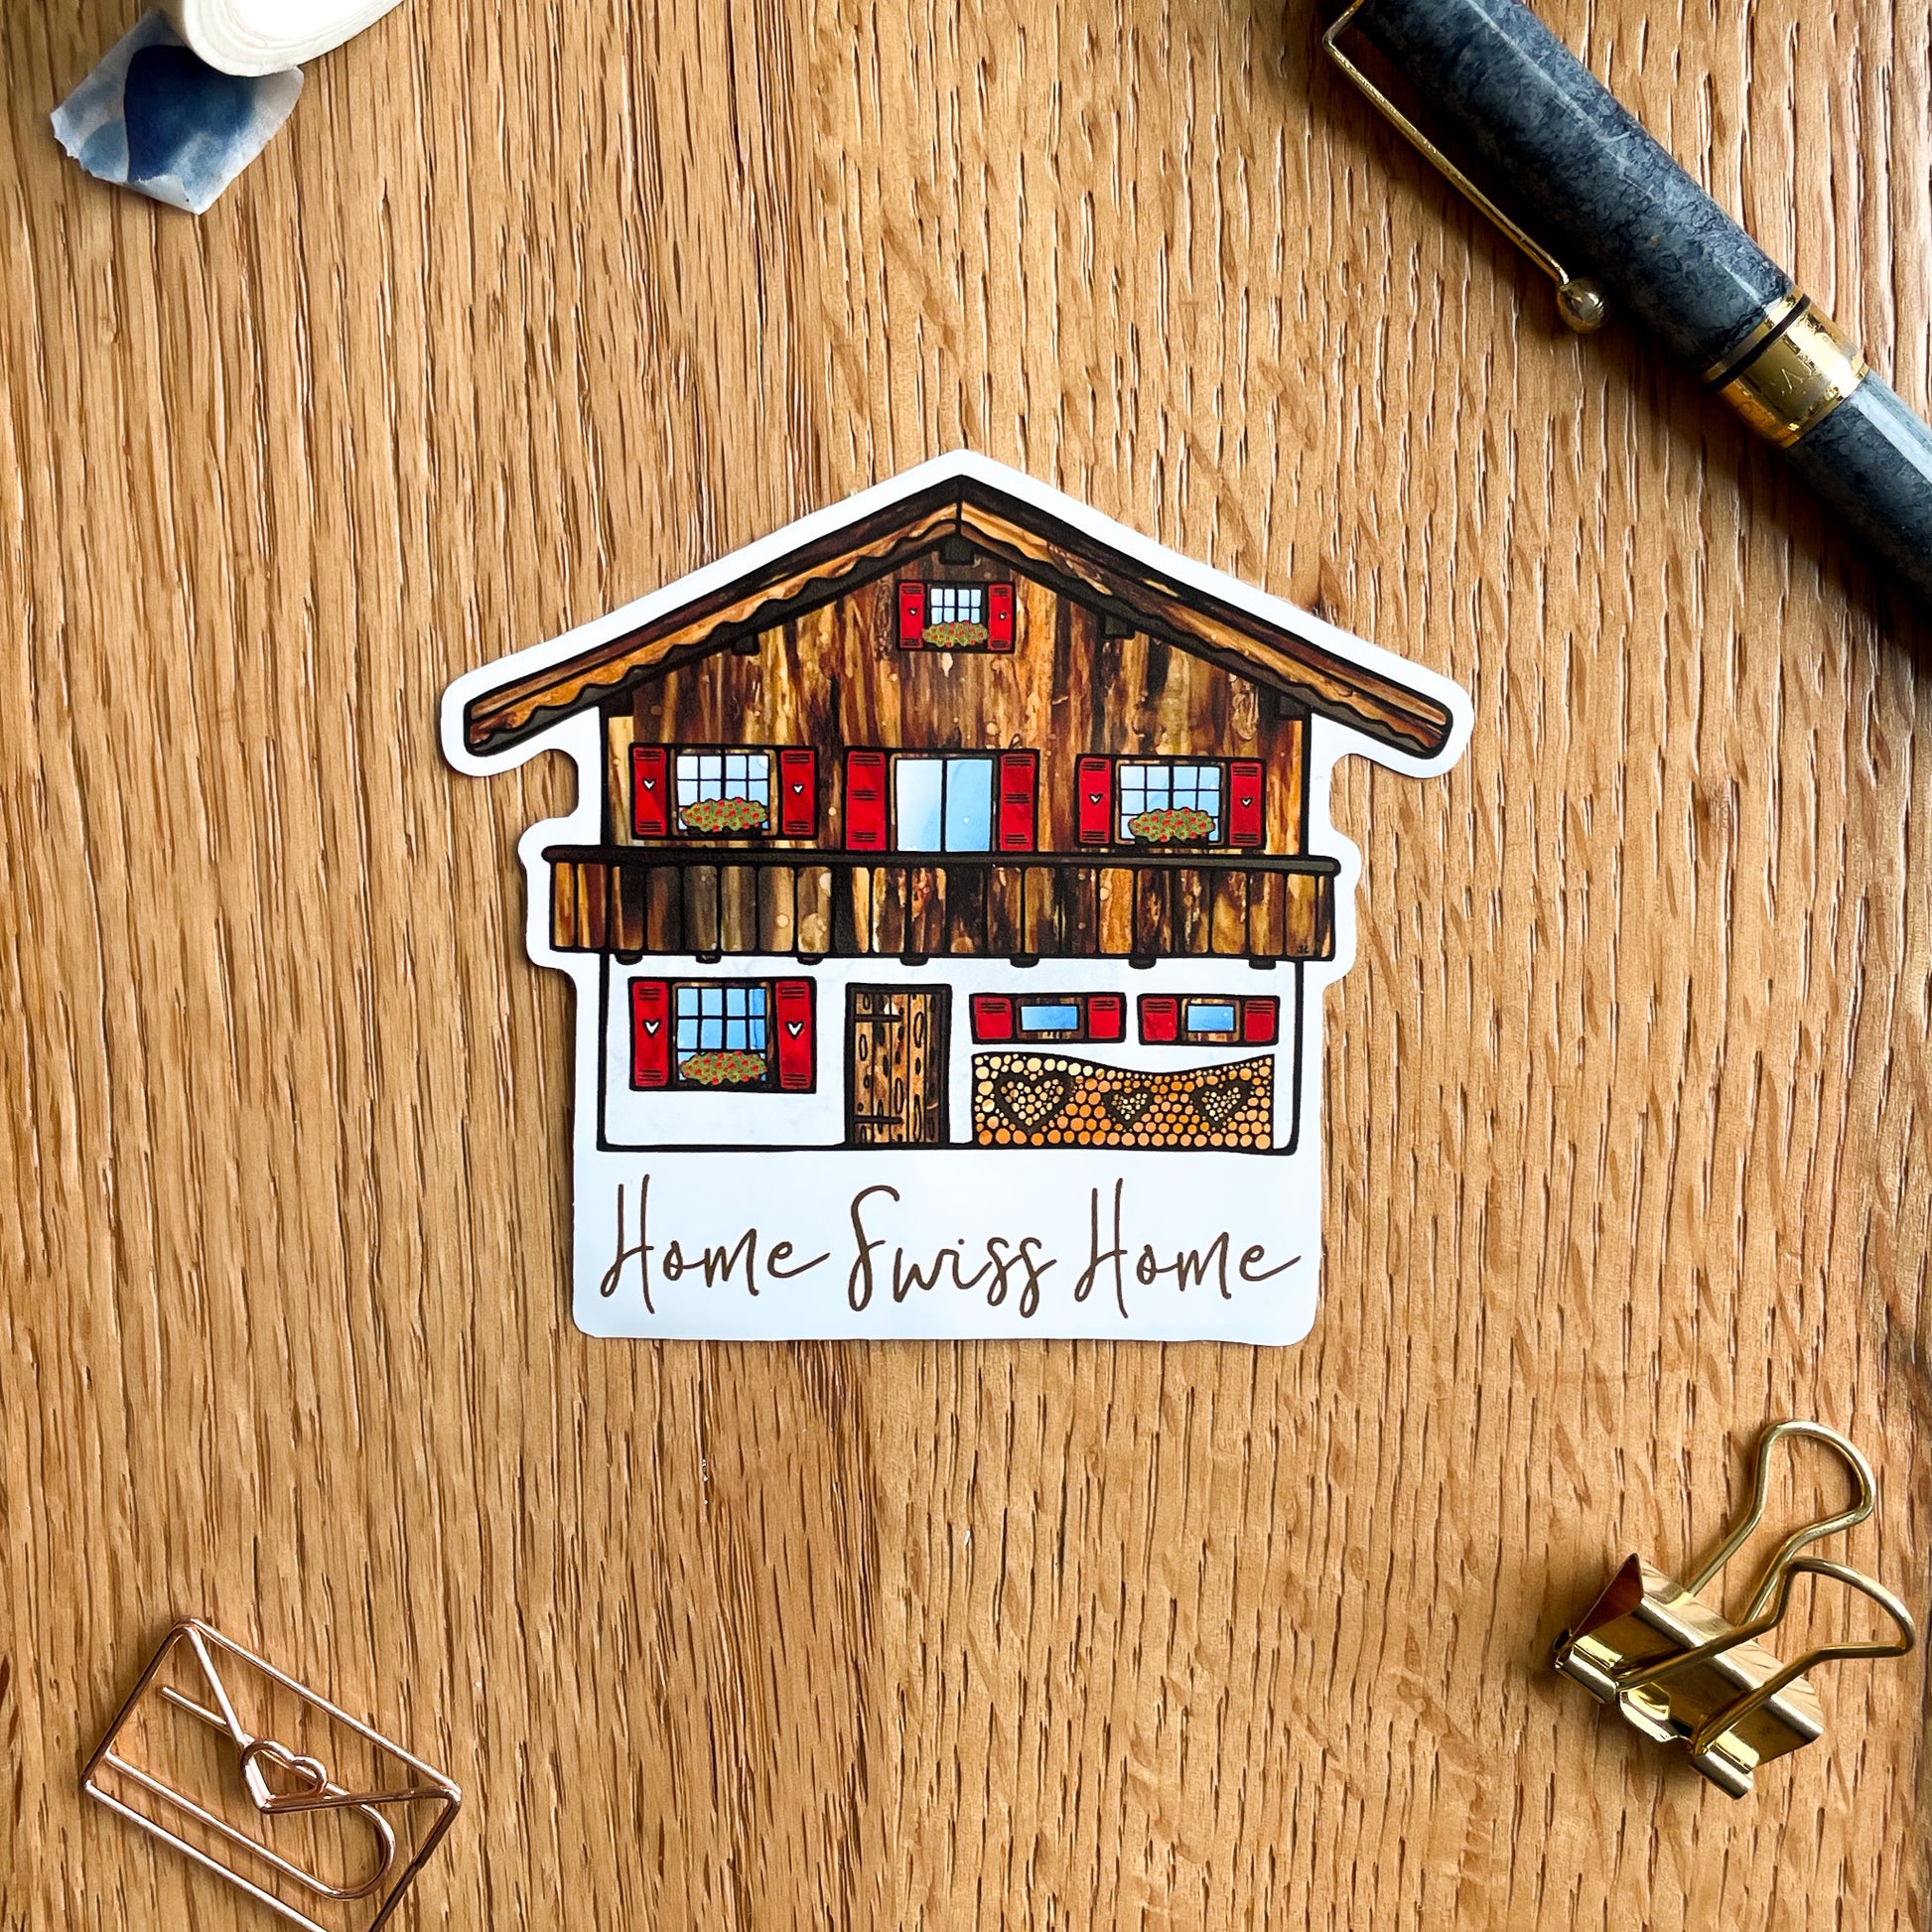 Capture the essence of an idyllic Swiss house with this beautiful vinyl sticker, a must-have souvenir for any lover of Switzerland.